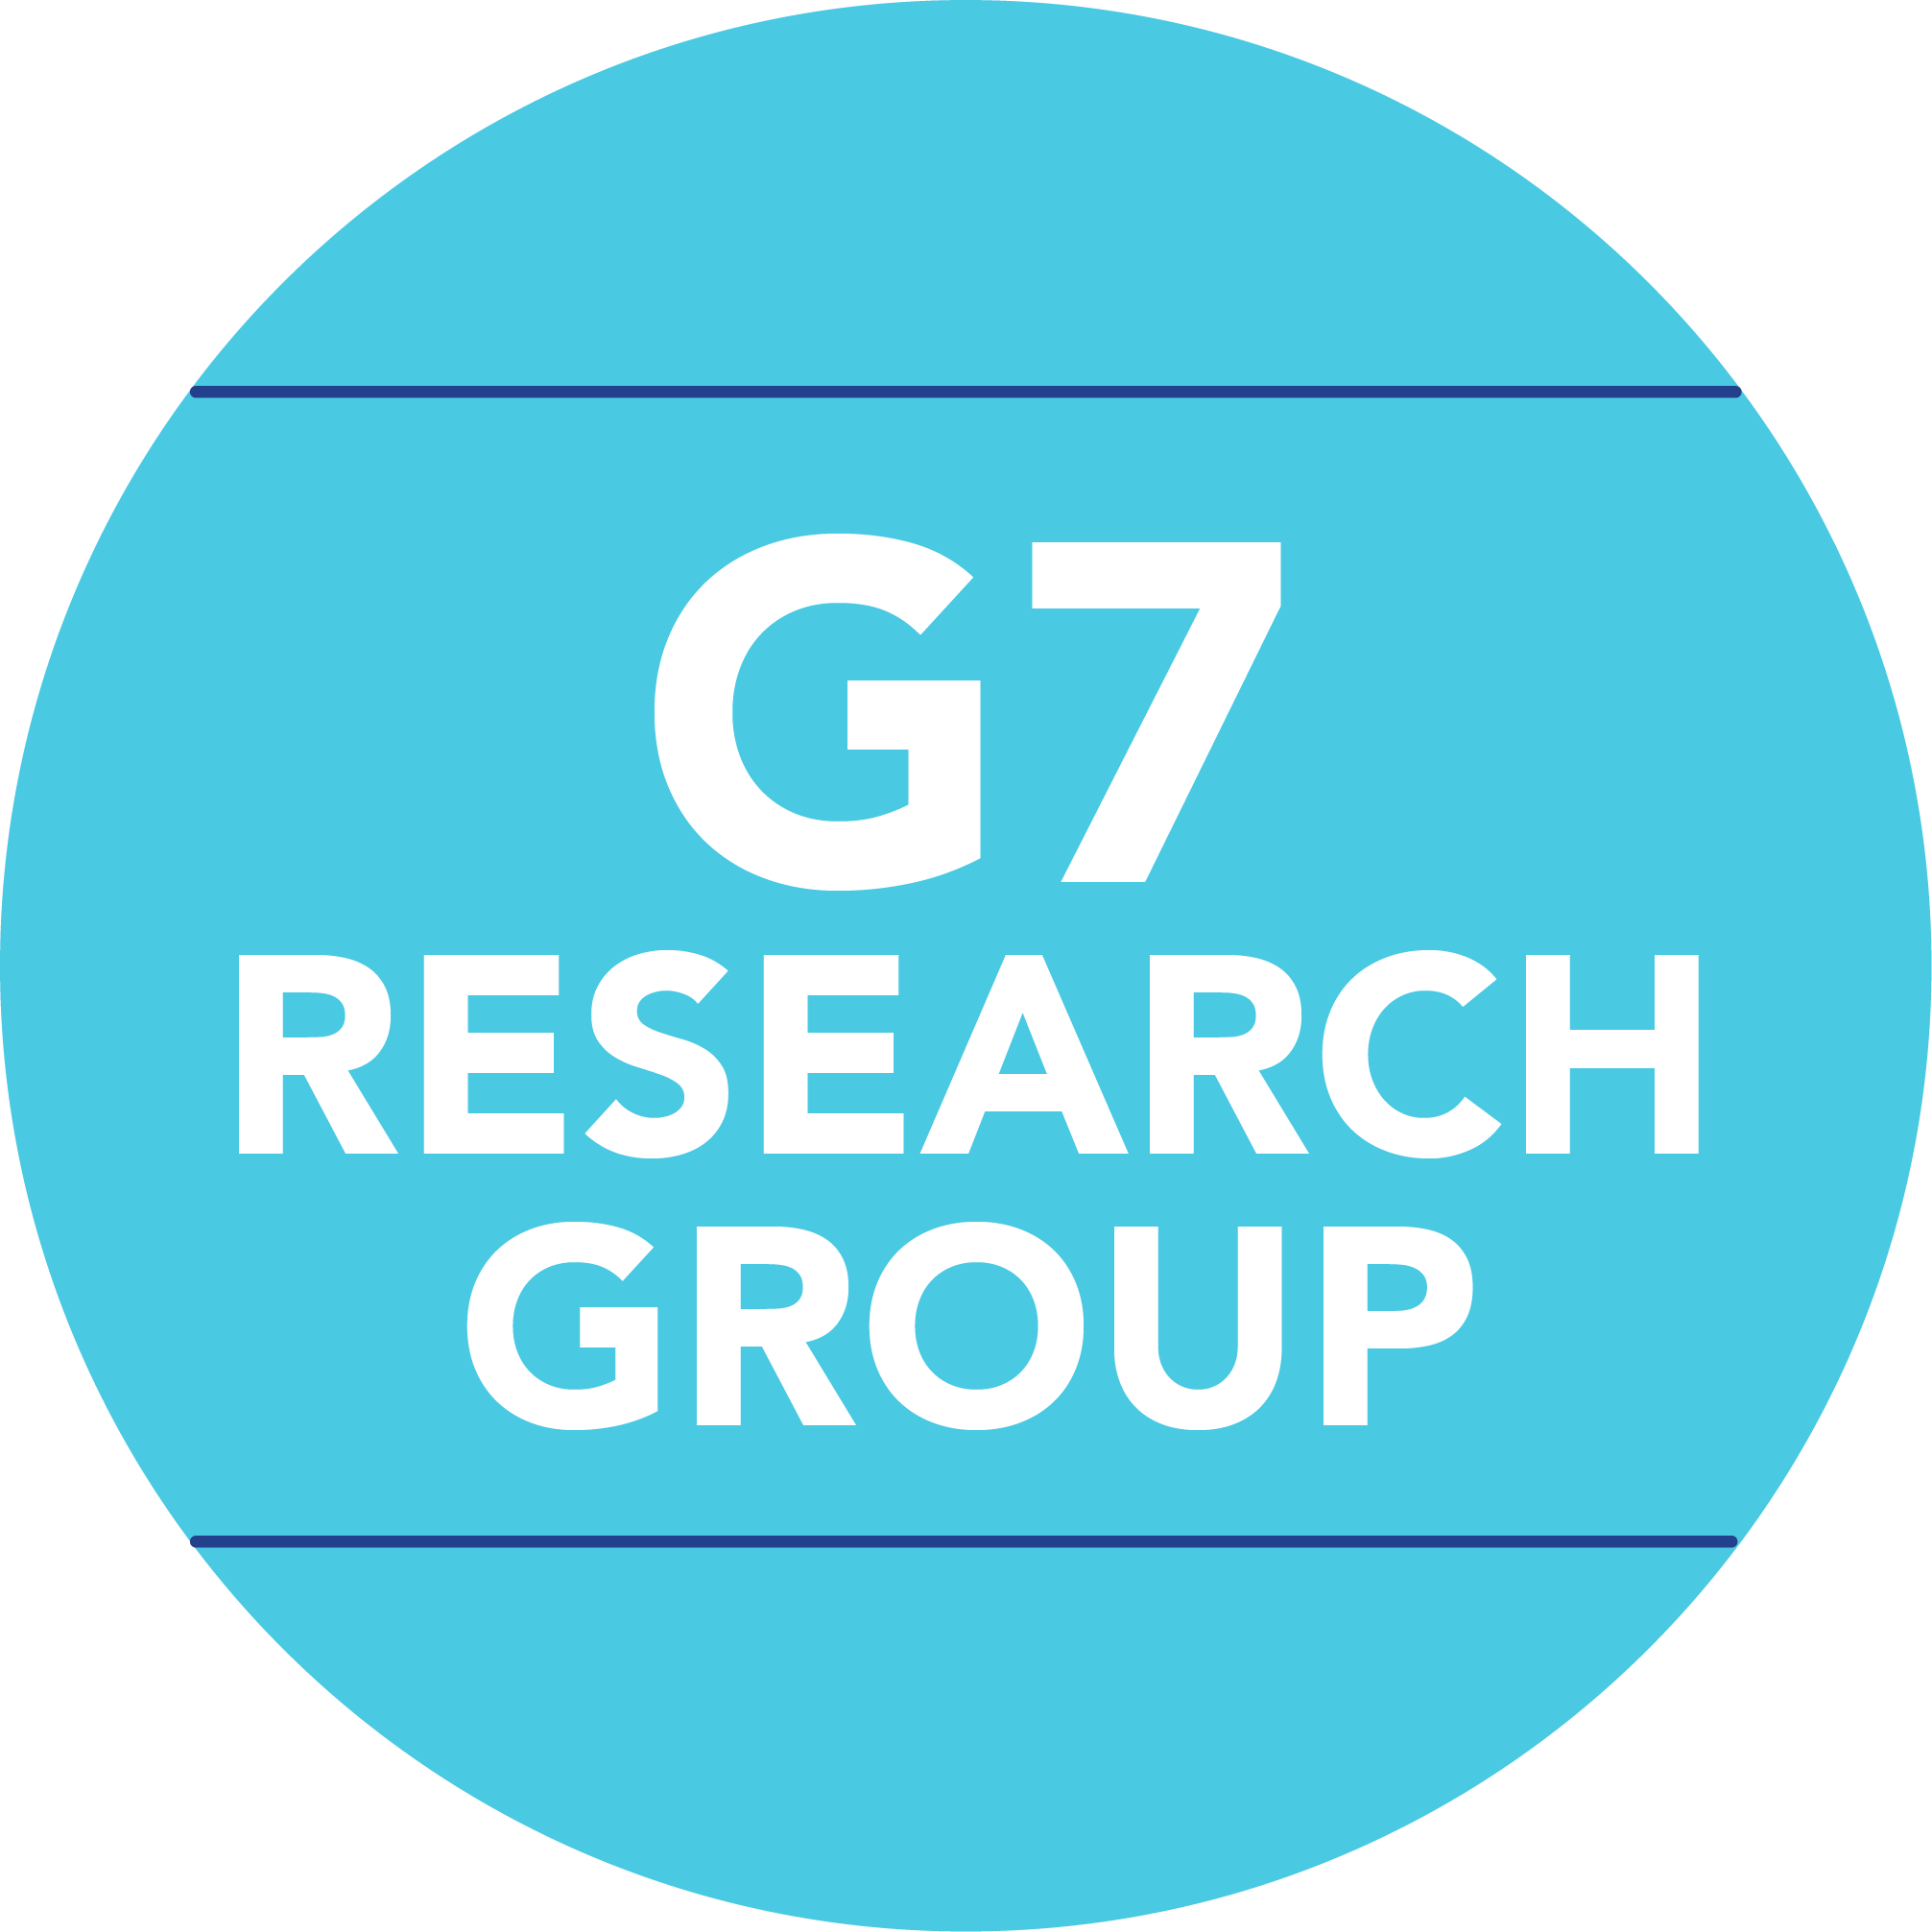 G7 Research Group